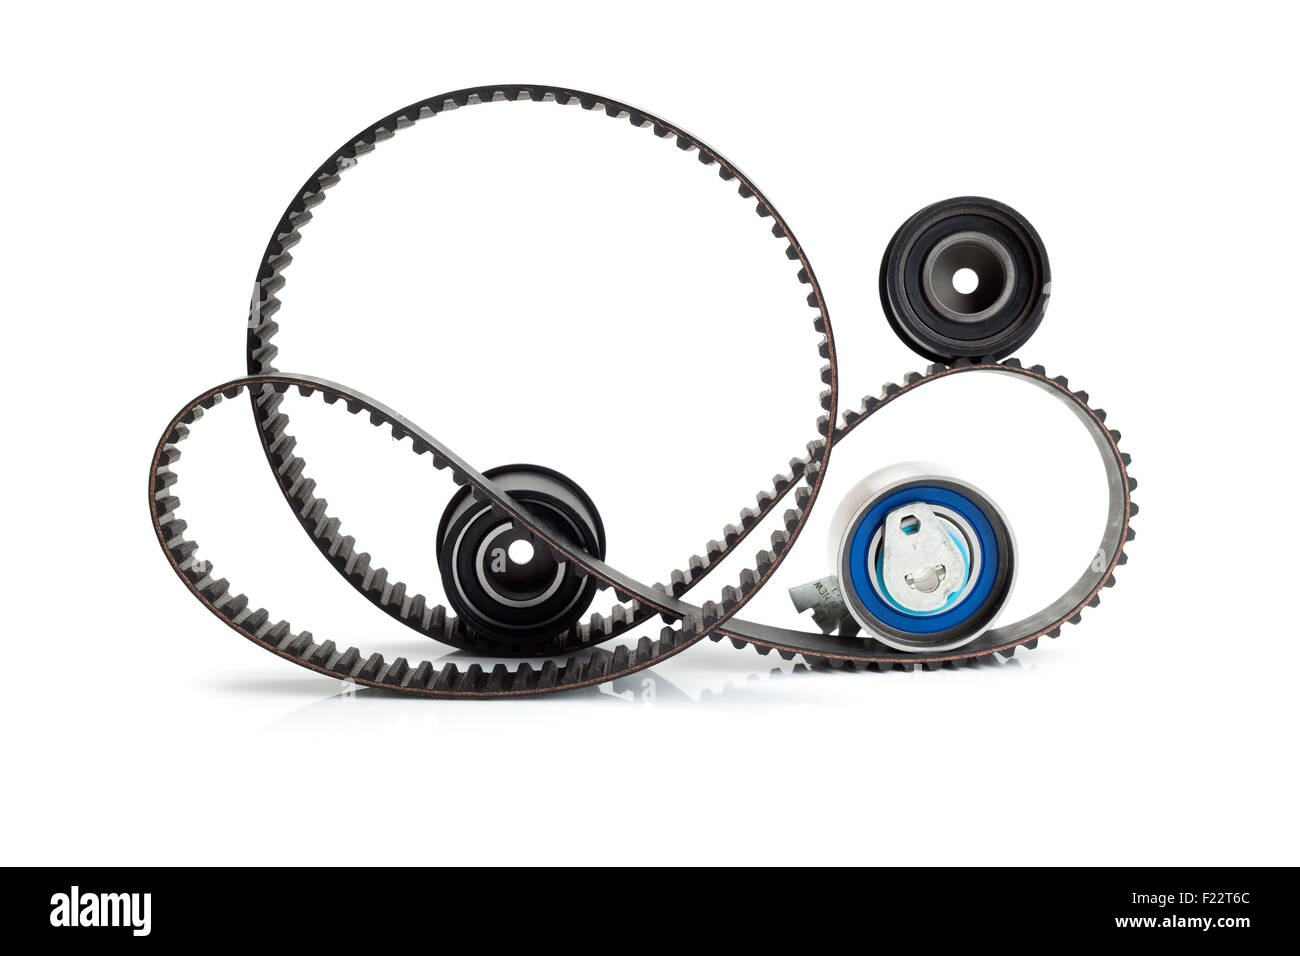 https://c8.alamy.com/comp/F22T6C/timing-belt-two-rollers-and-the-tension-mechanism-isolate-F22T6C.jpg